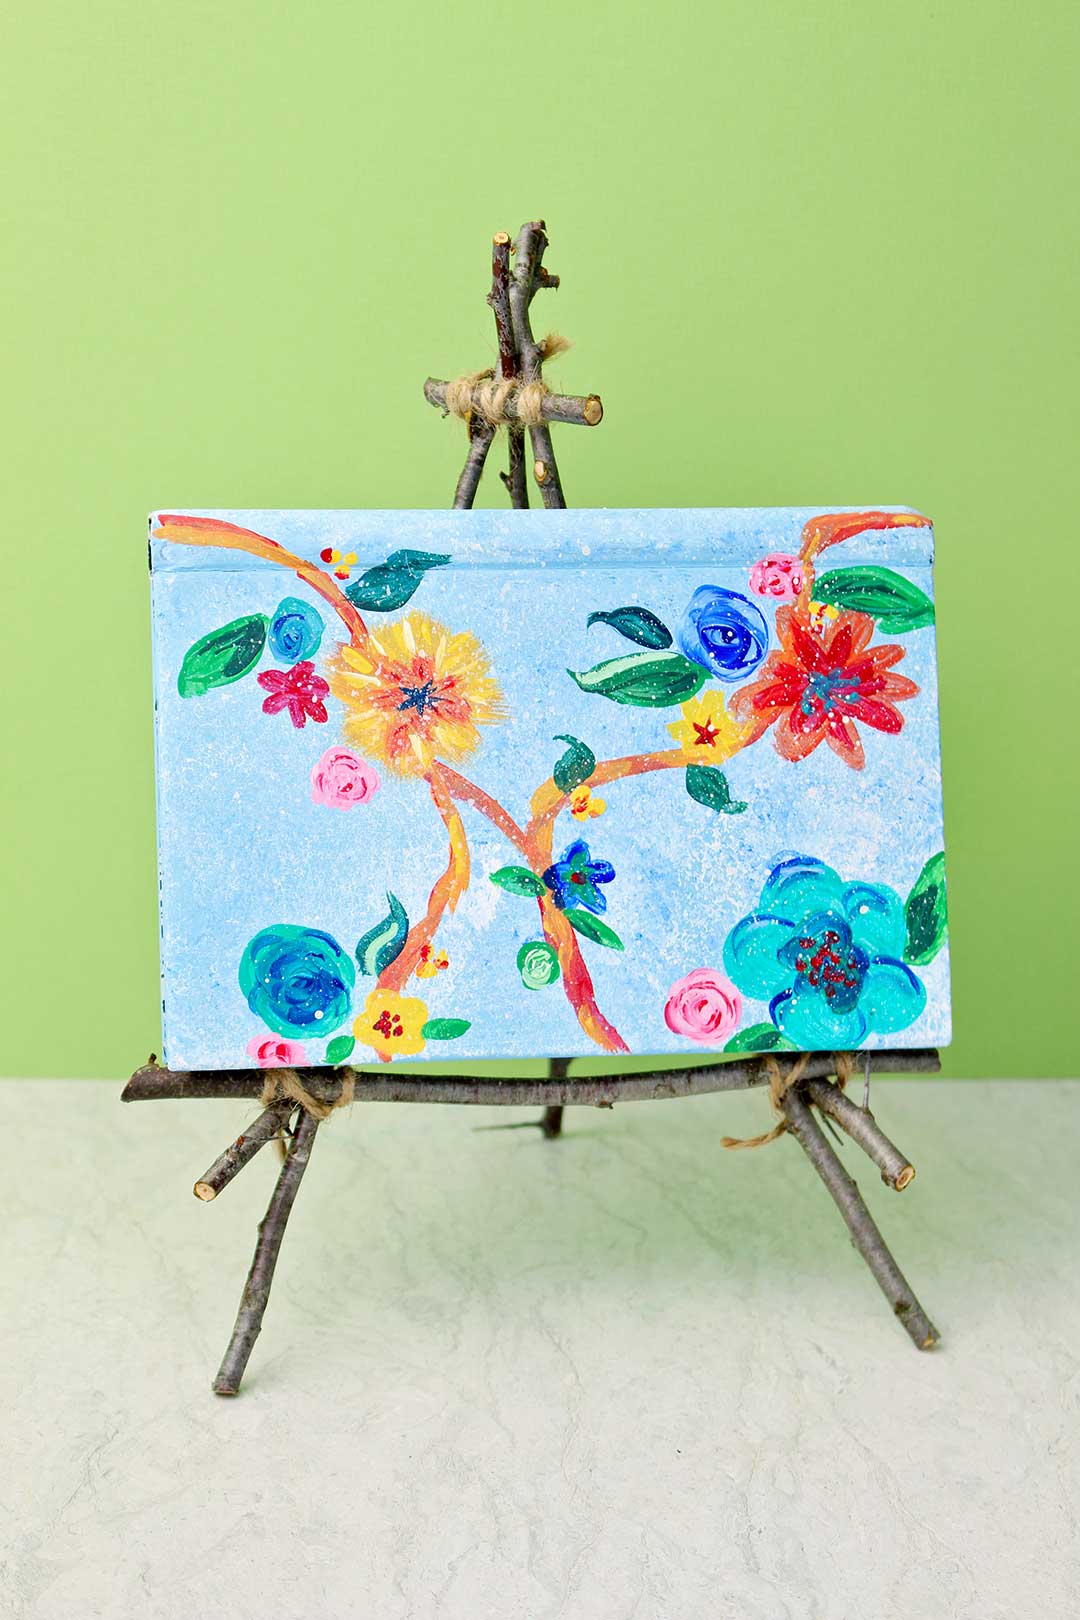 Tabletop easel from twigs holding a painted journal on display against a green background.